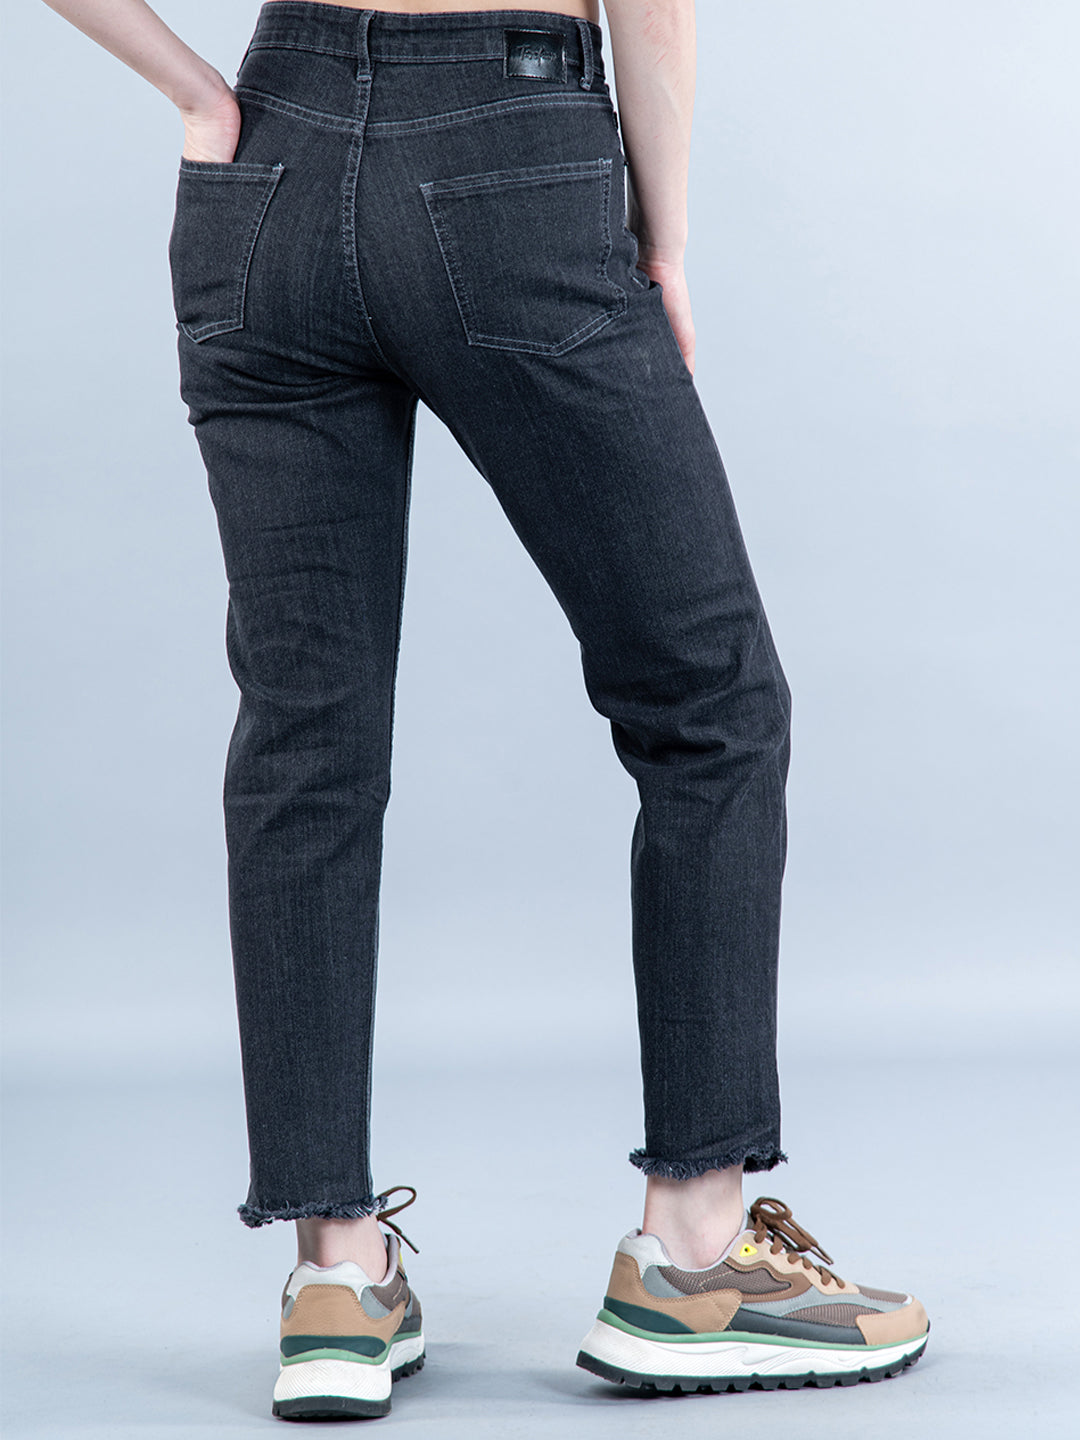 Black Thigh Cut Jeans For Women